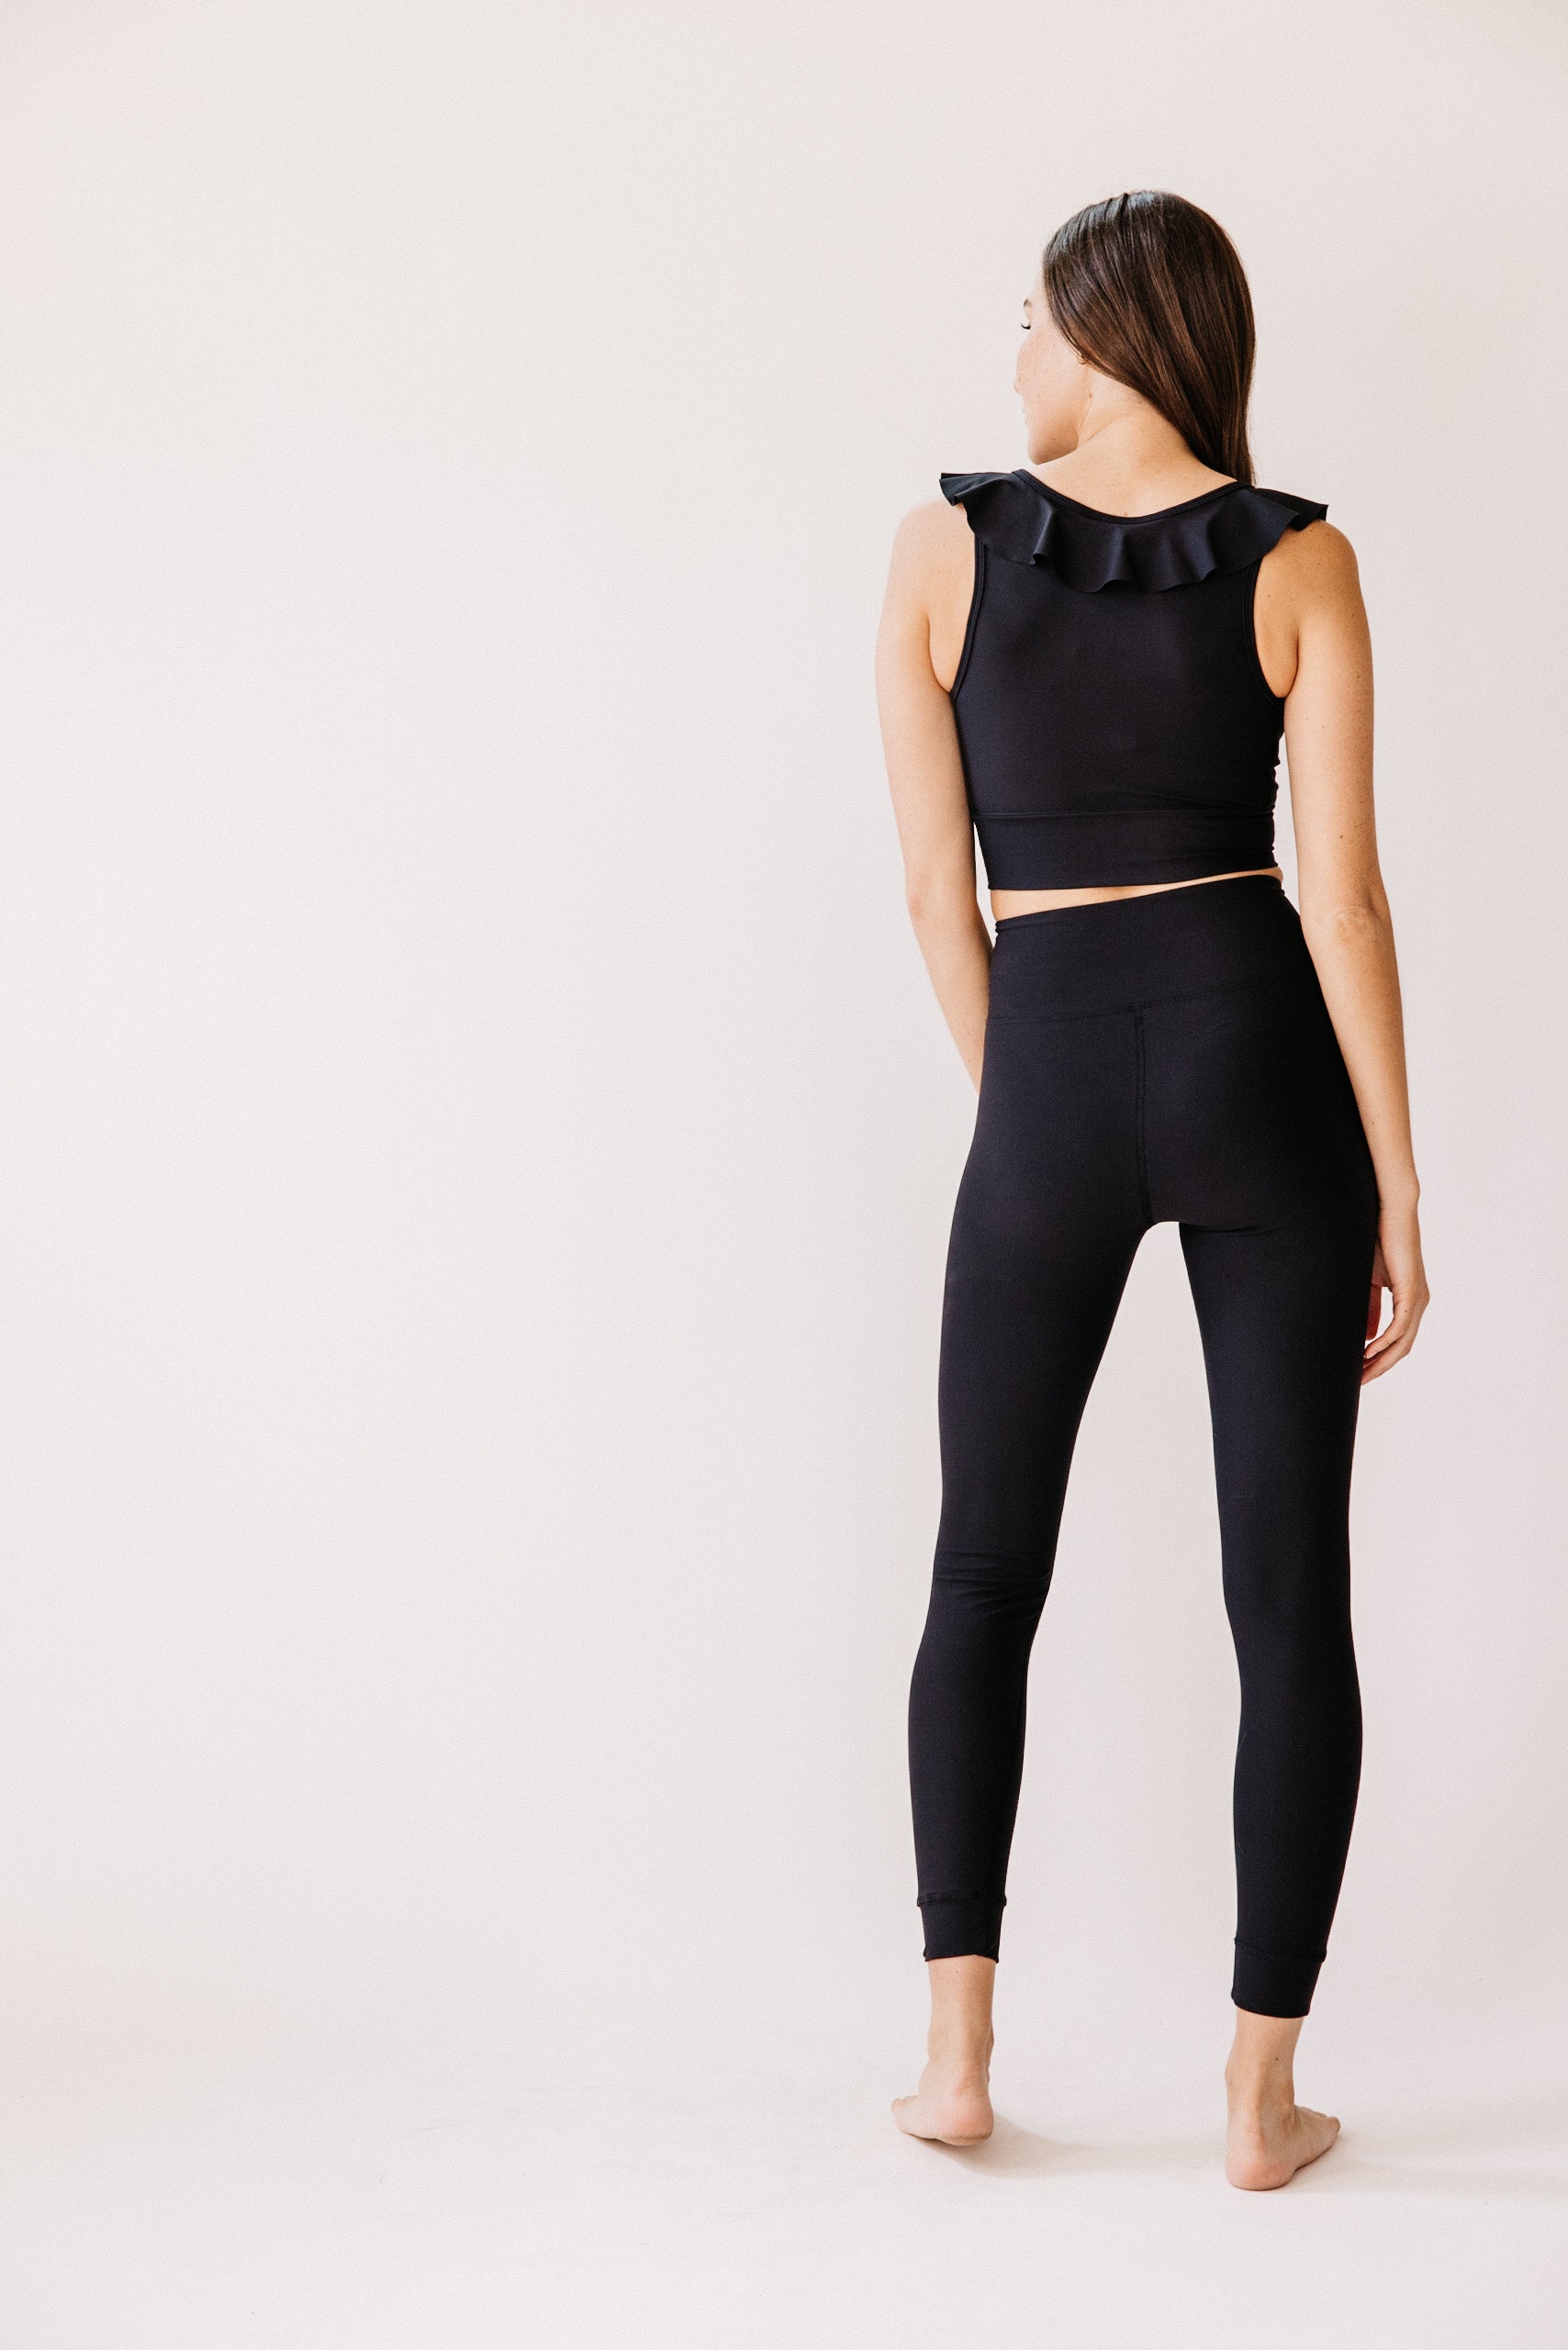 Lace Up Leggings - Black – Swaay